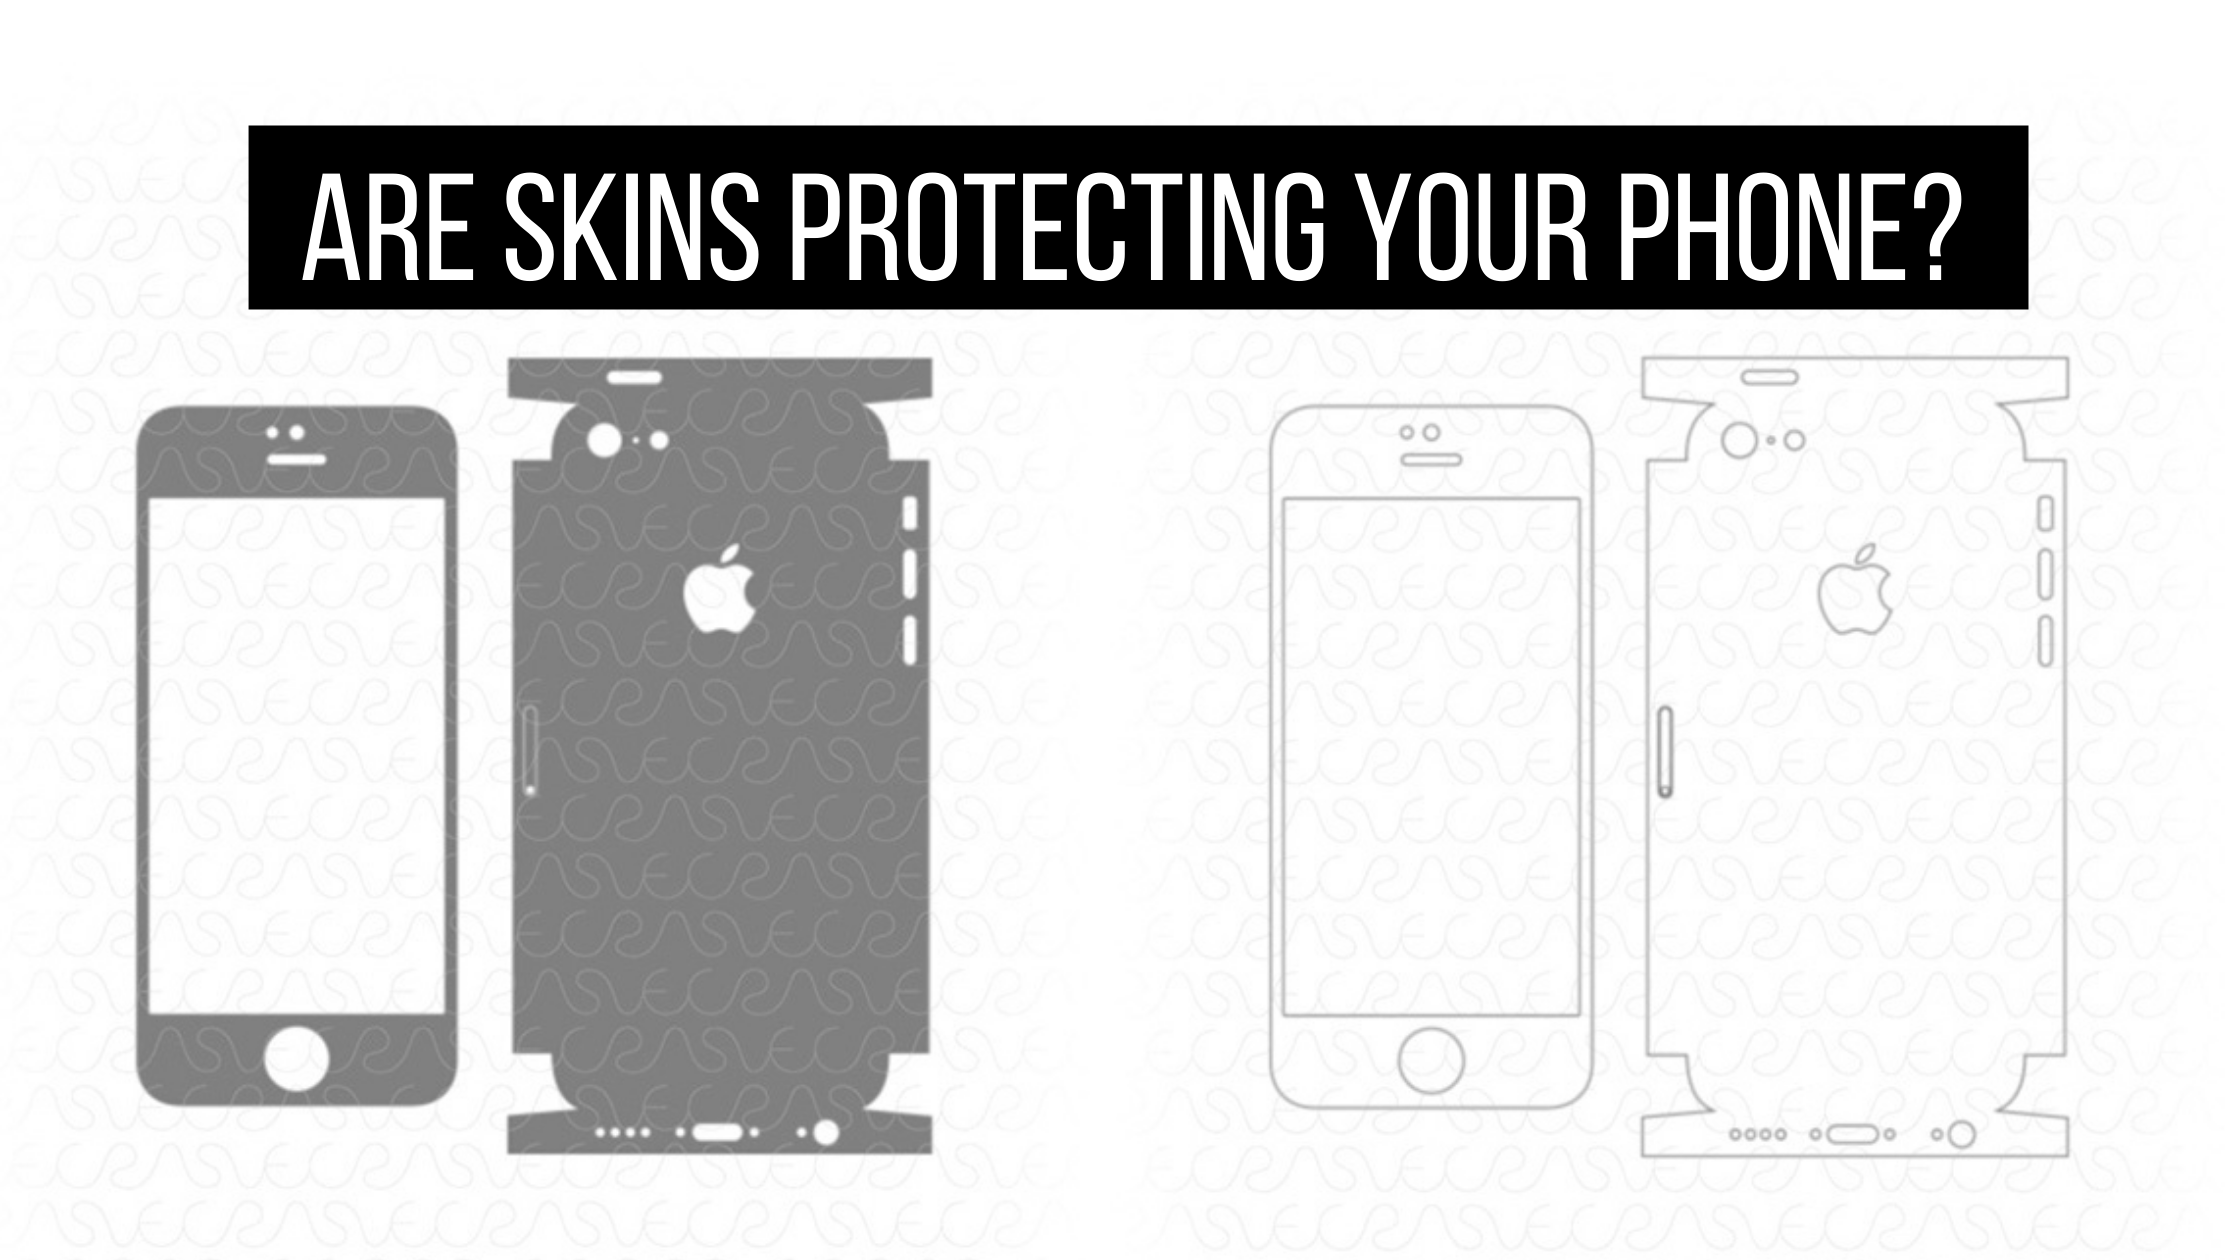 Are Skins Protecting Your Phone